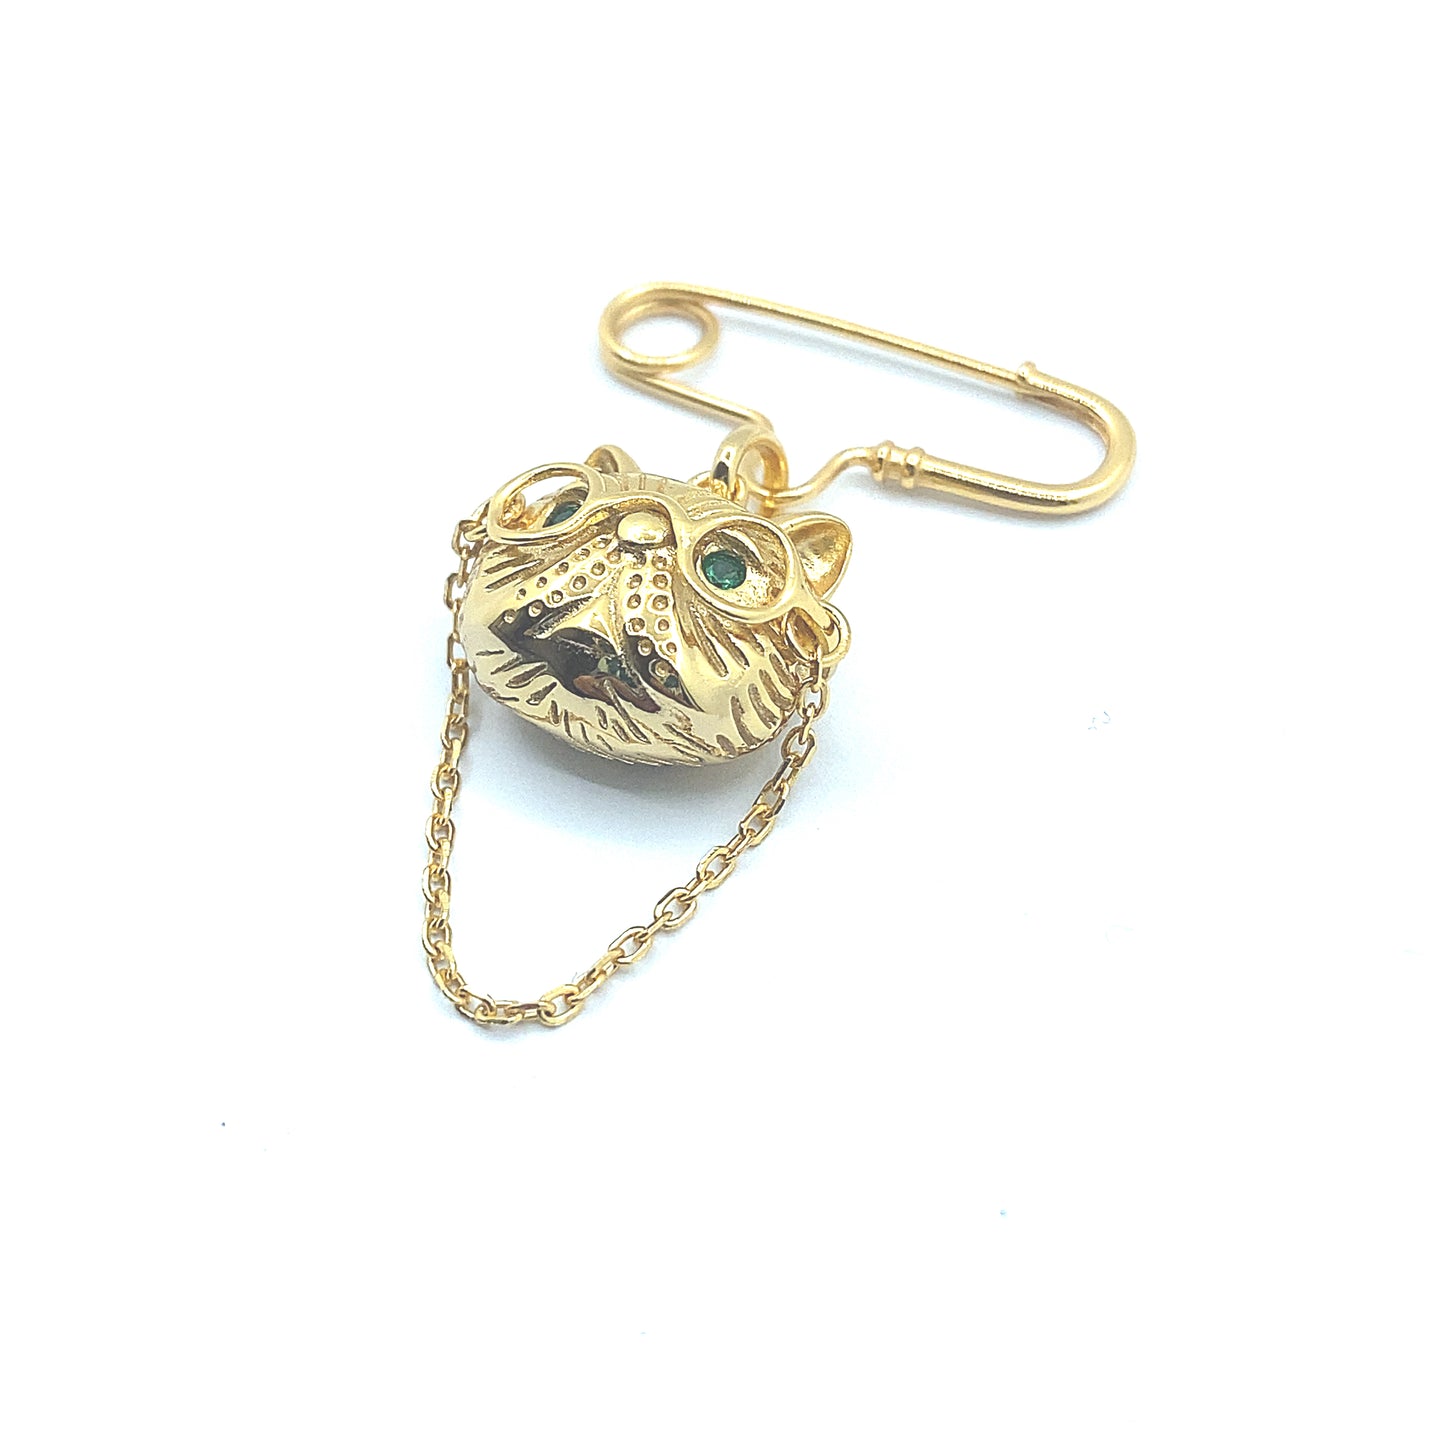 Silver, 18ct Gold Plated Frenchie Cat Brooch with Sparkling Green Eyes